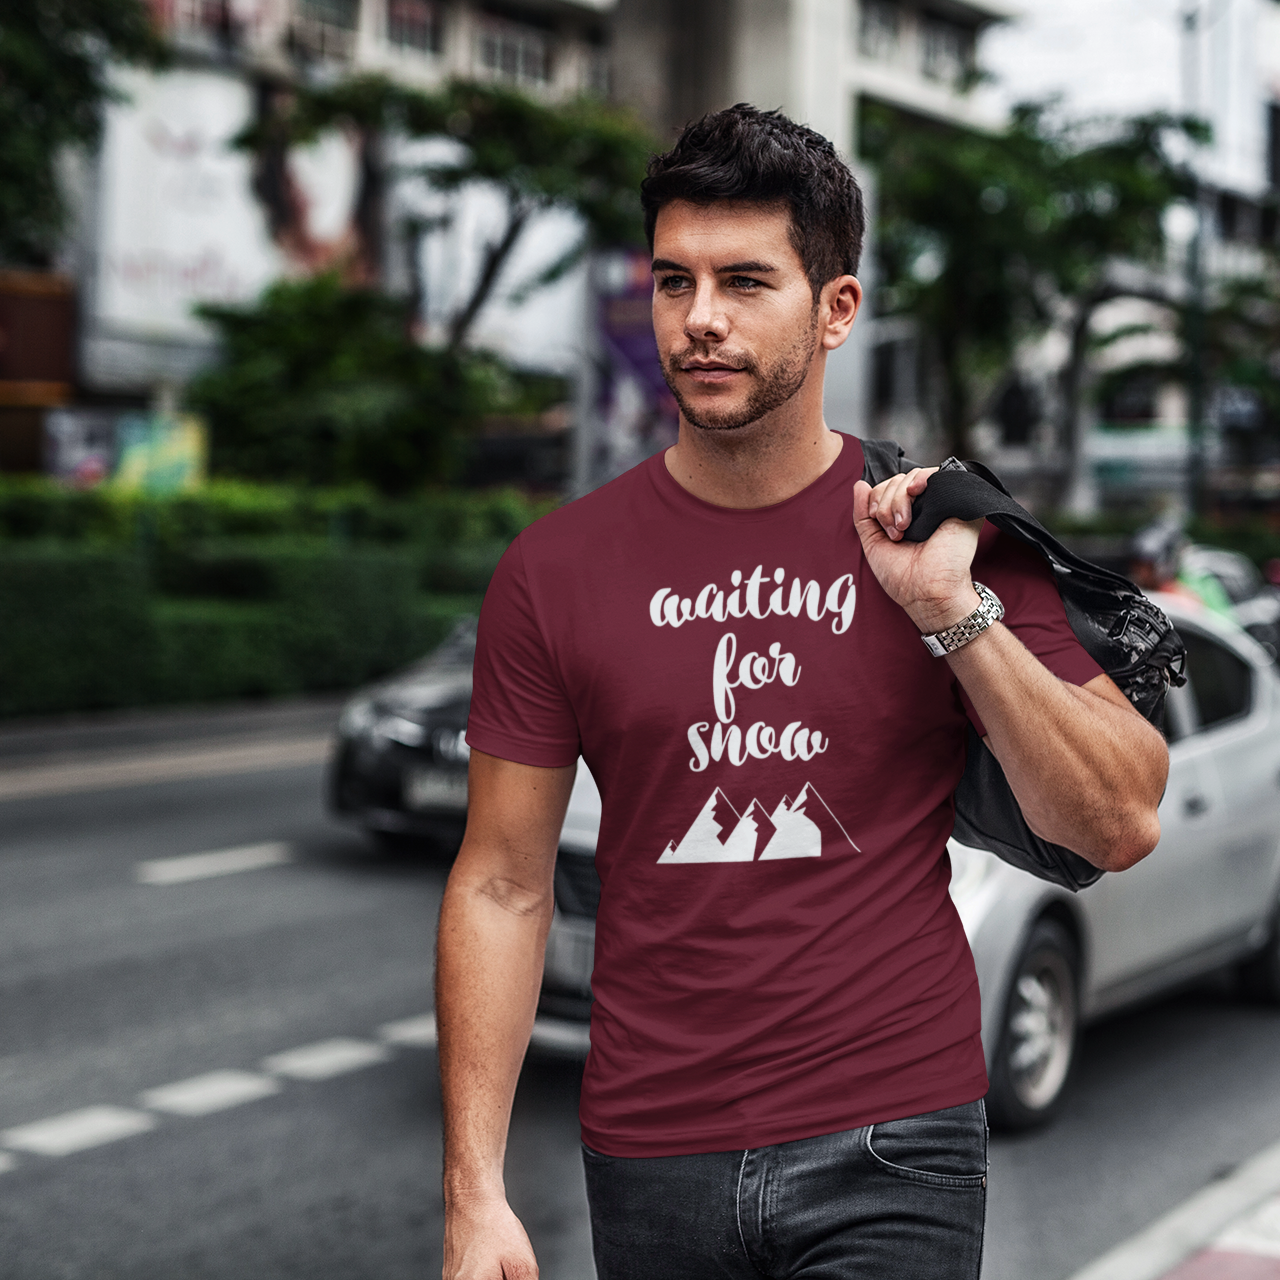 Man walking in city holding bag wearing burgundy shirt with 'Waiting for snow' print by KMLeon.